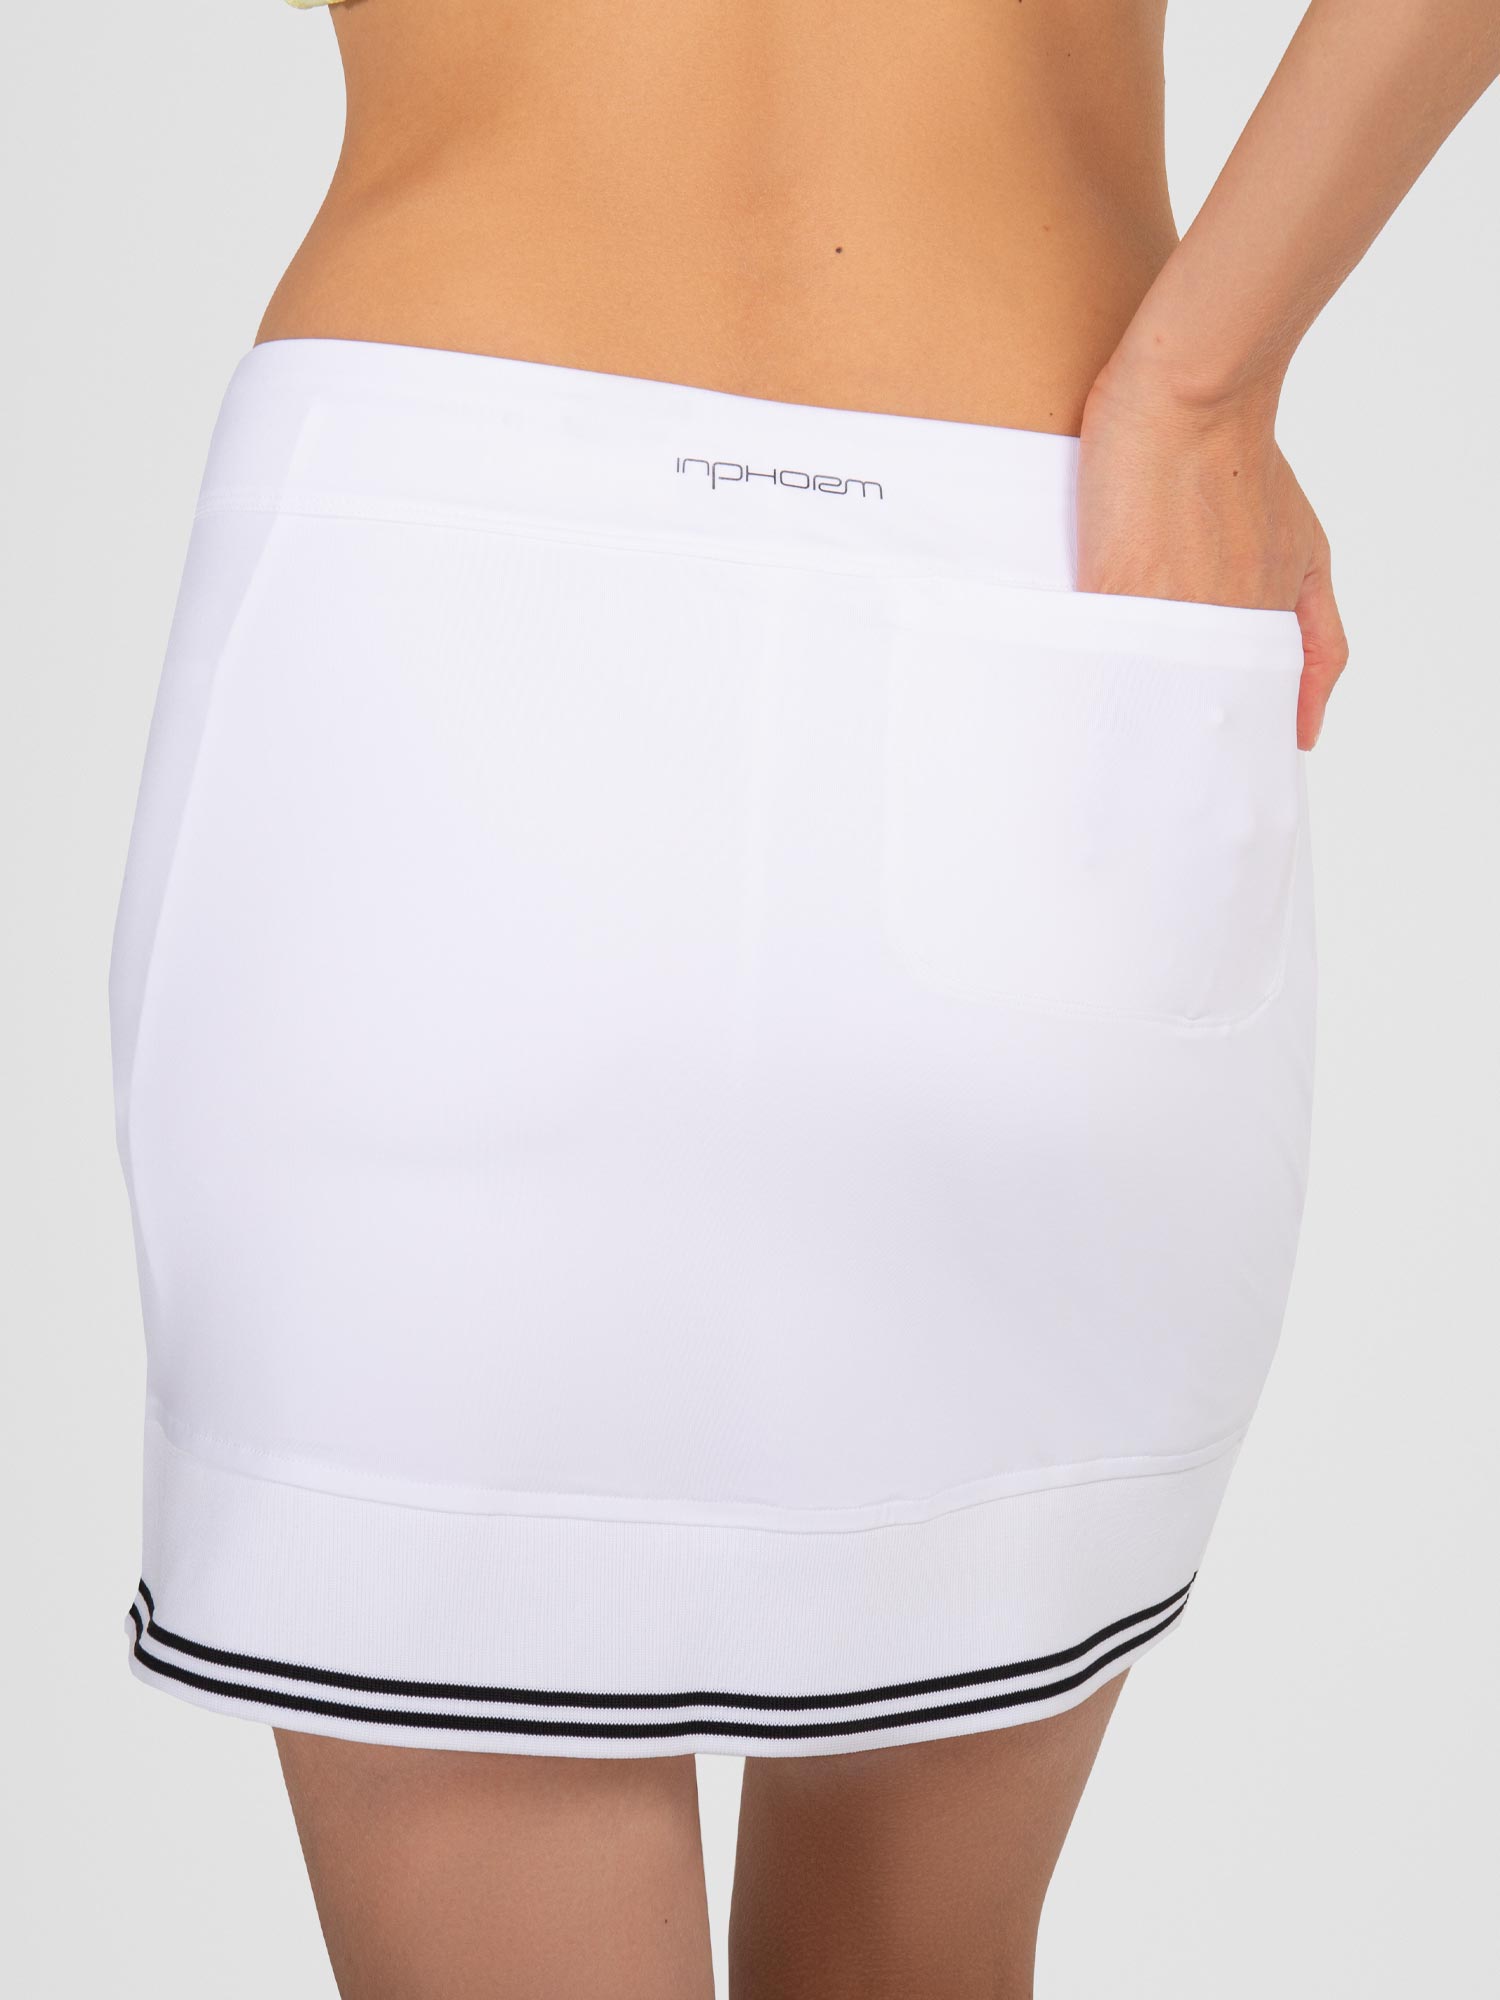 Back view of model wearing the Lilian 15" skirt in white/black by inPhorm NYC with her hand in her back pocket